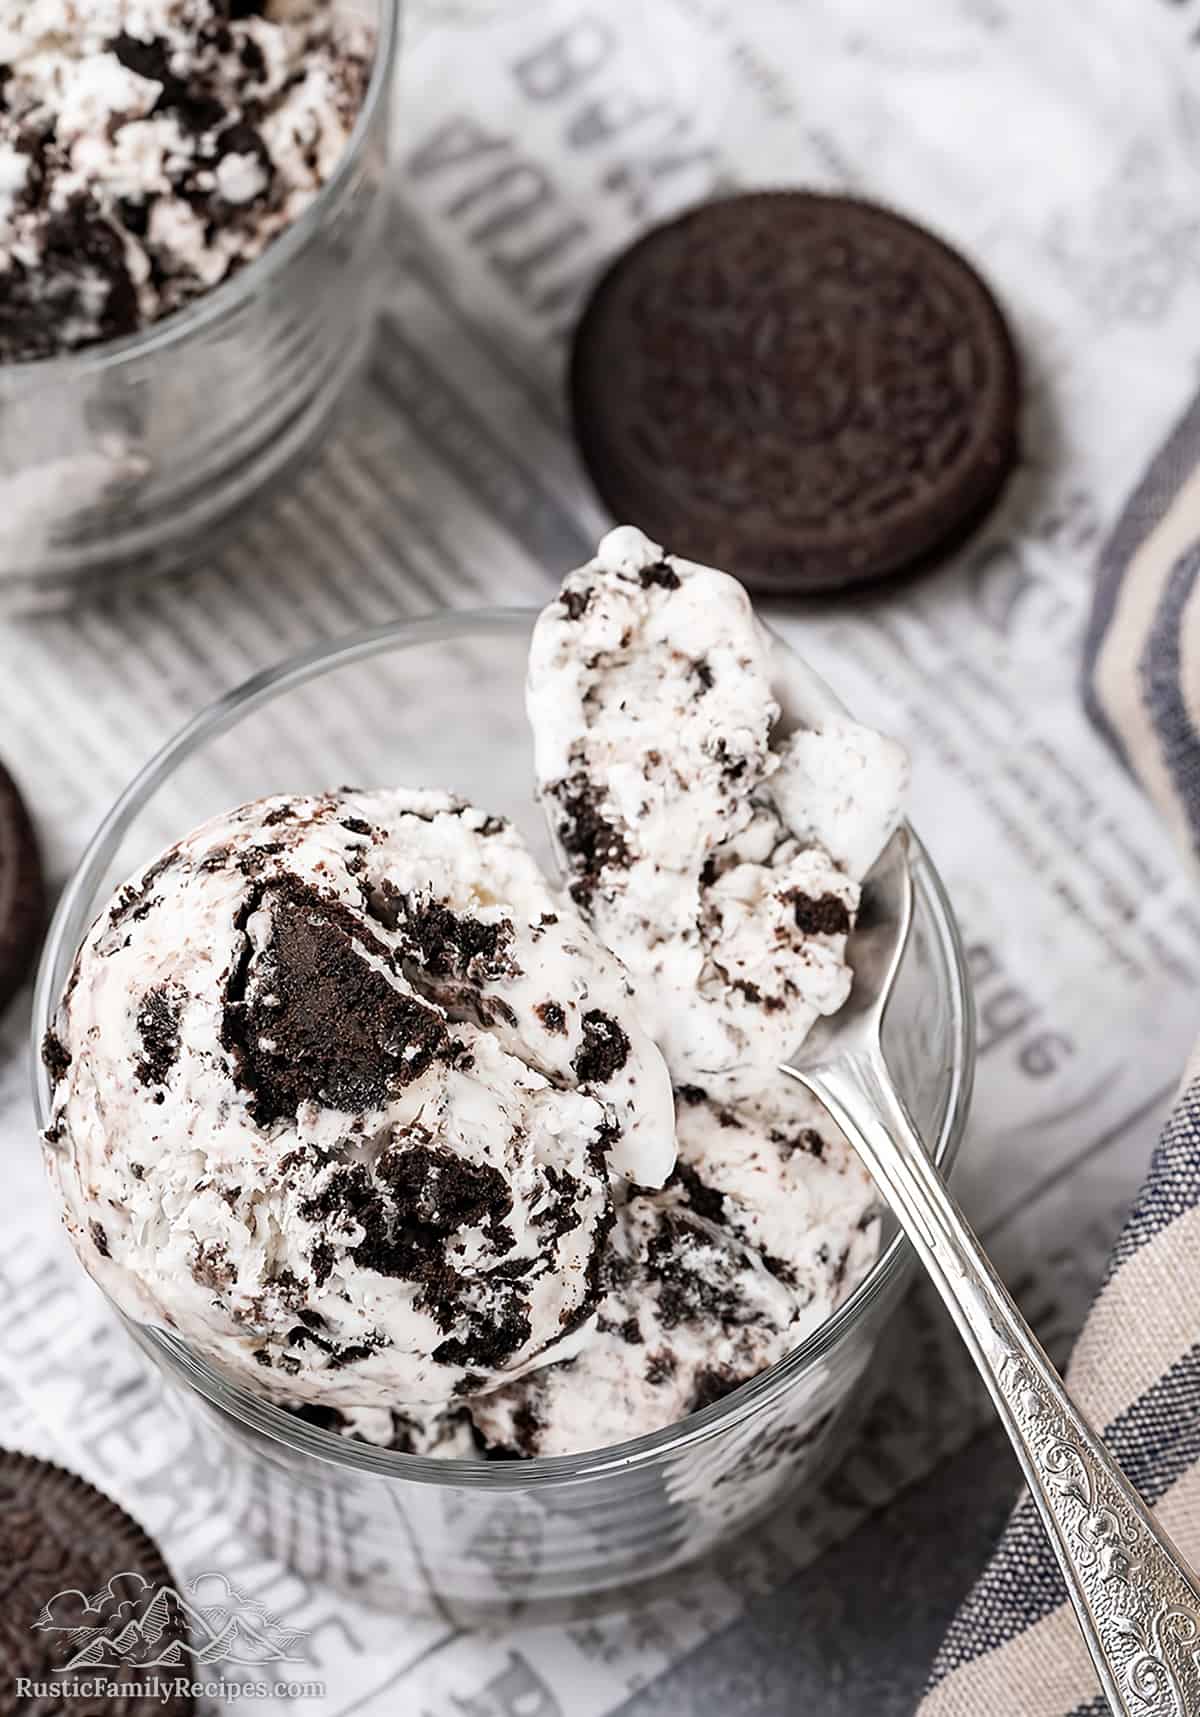 Oreo Ice Cream in a glass with a spoon taking a bite out